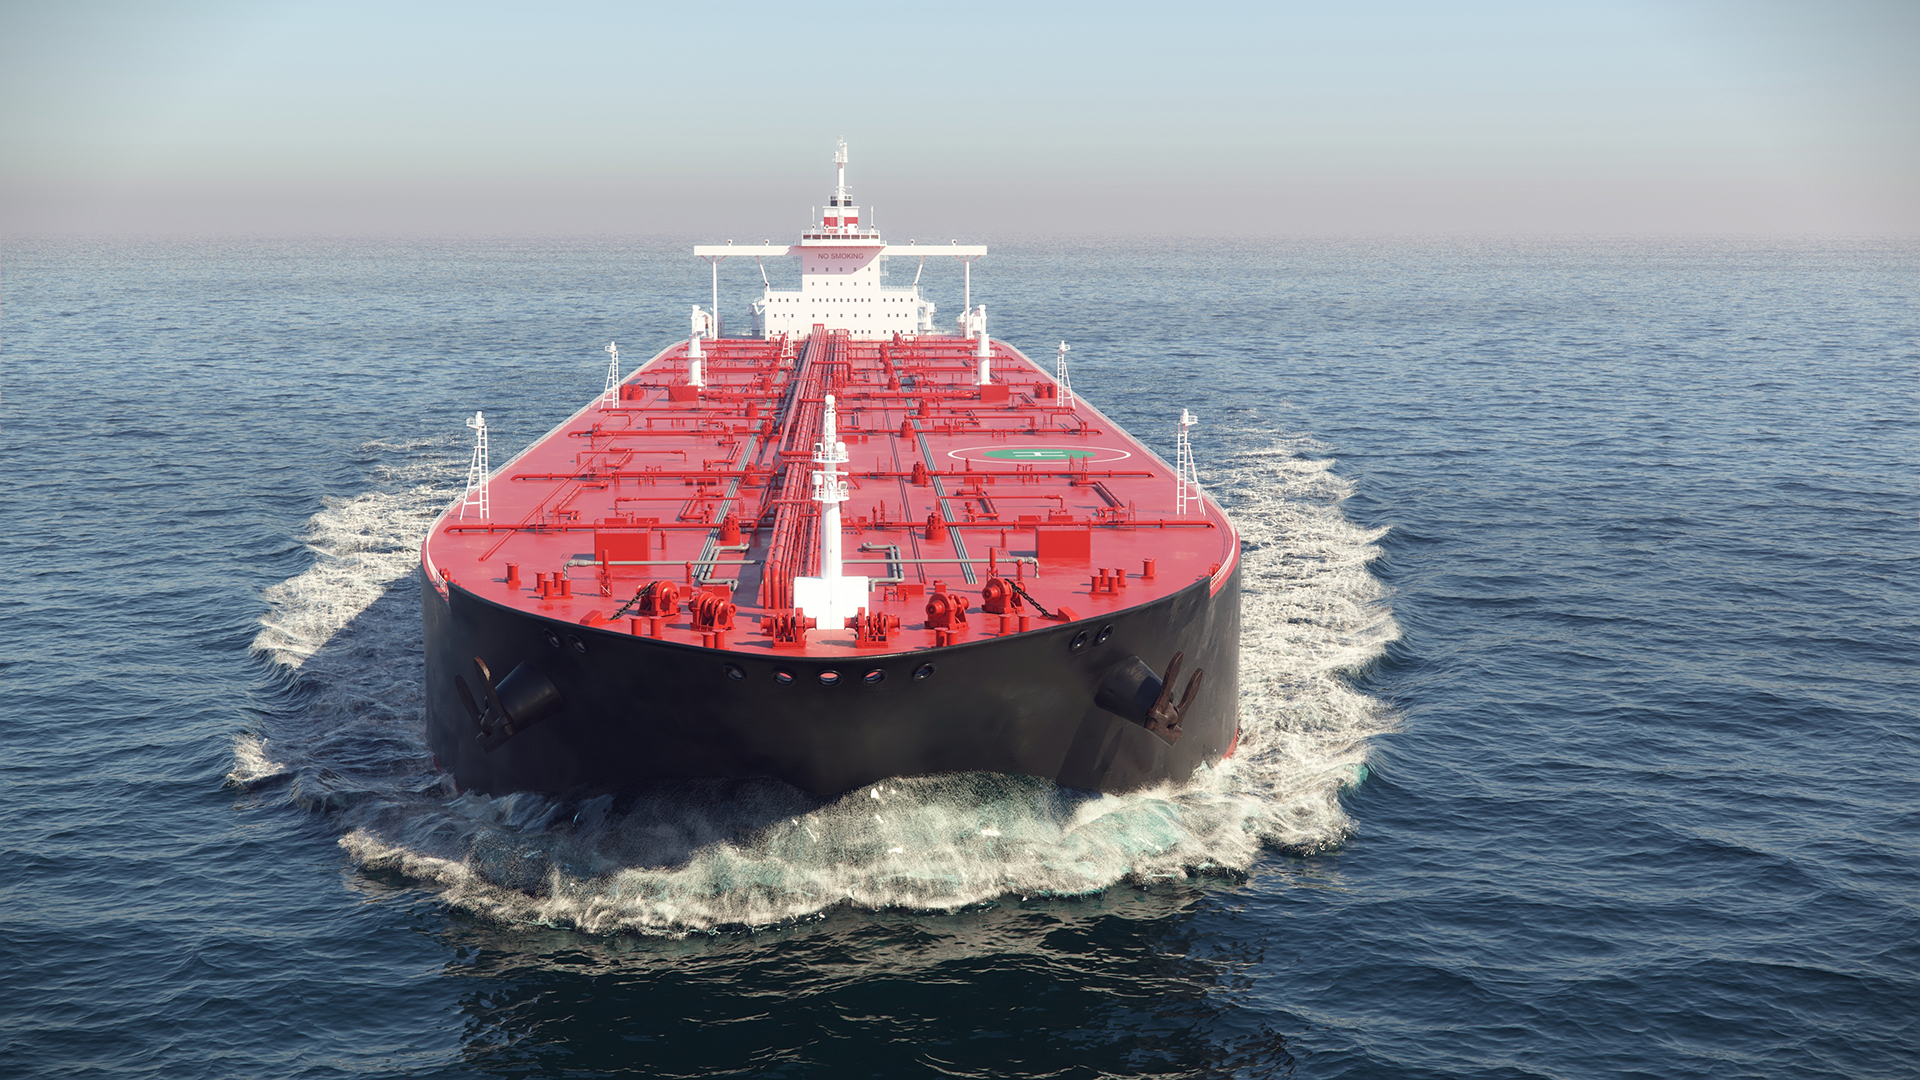 Ship Inspectors Conduct Virtual Inspections of Oil Tankers During Pandemic